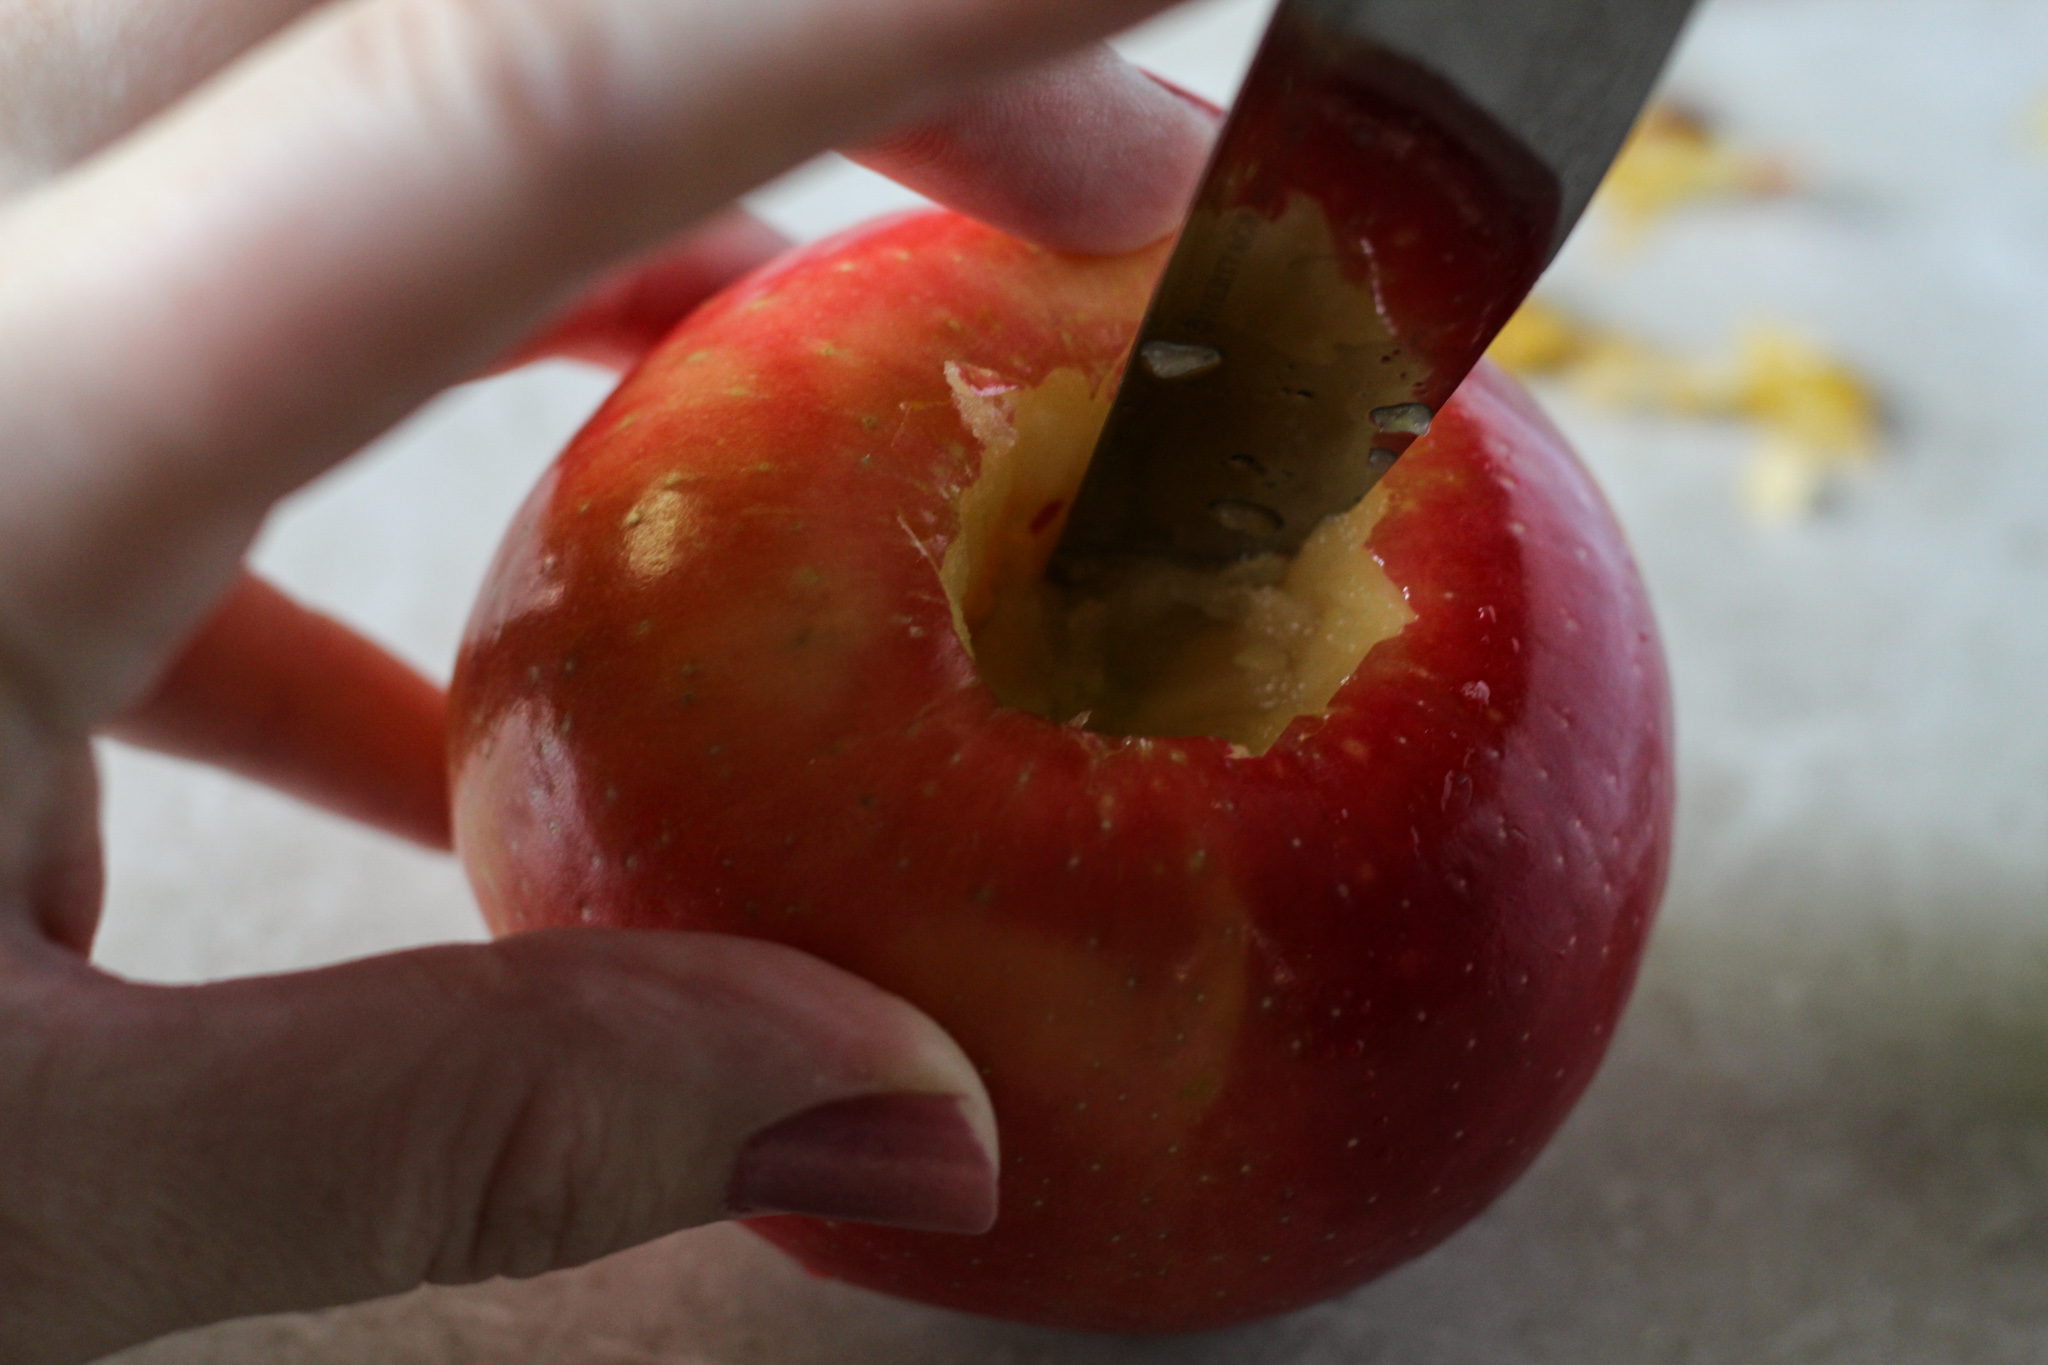 Removing apple core and seeds with a knife